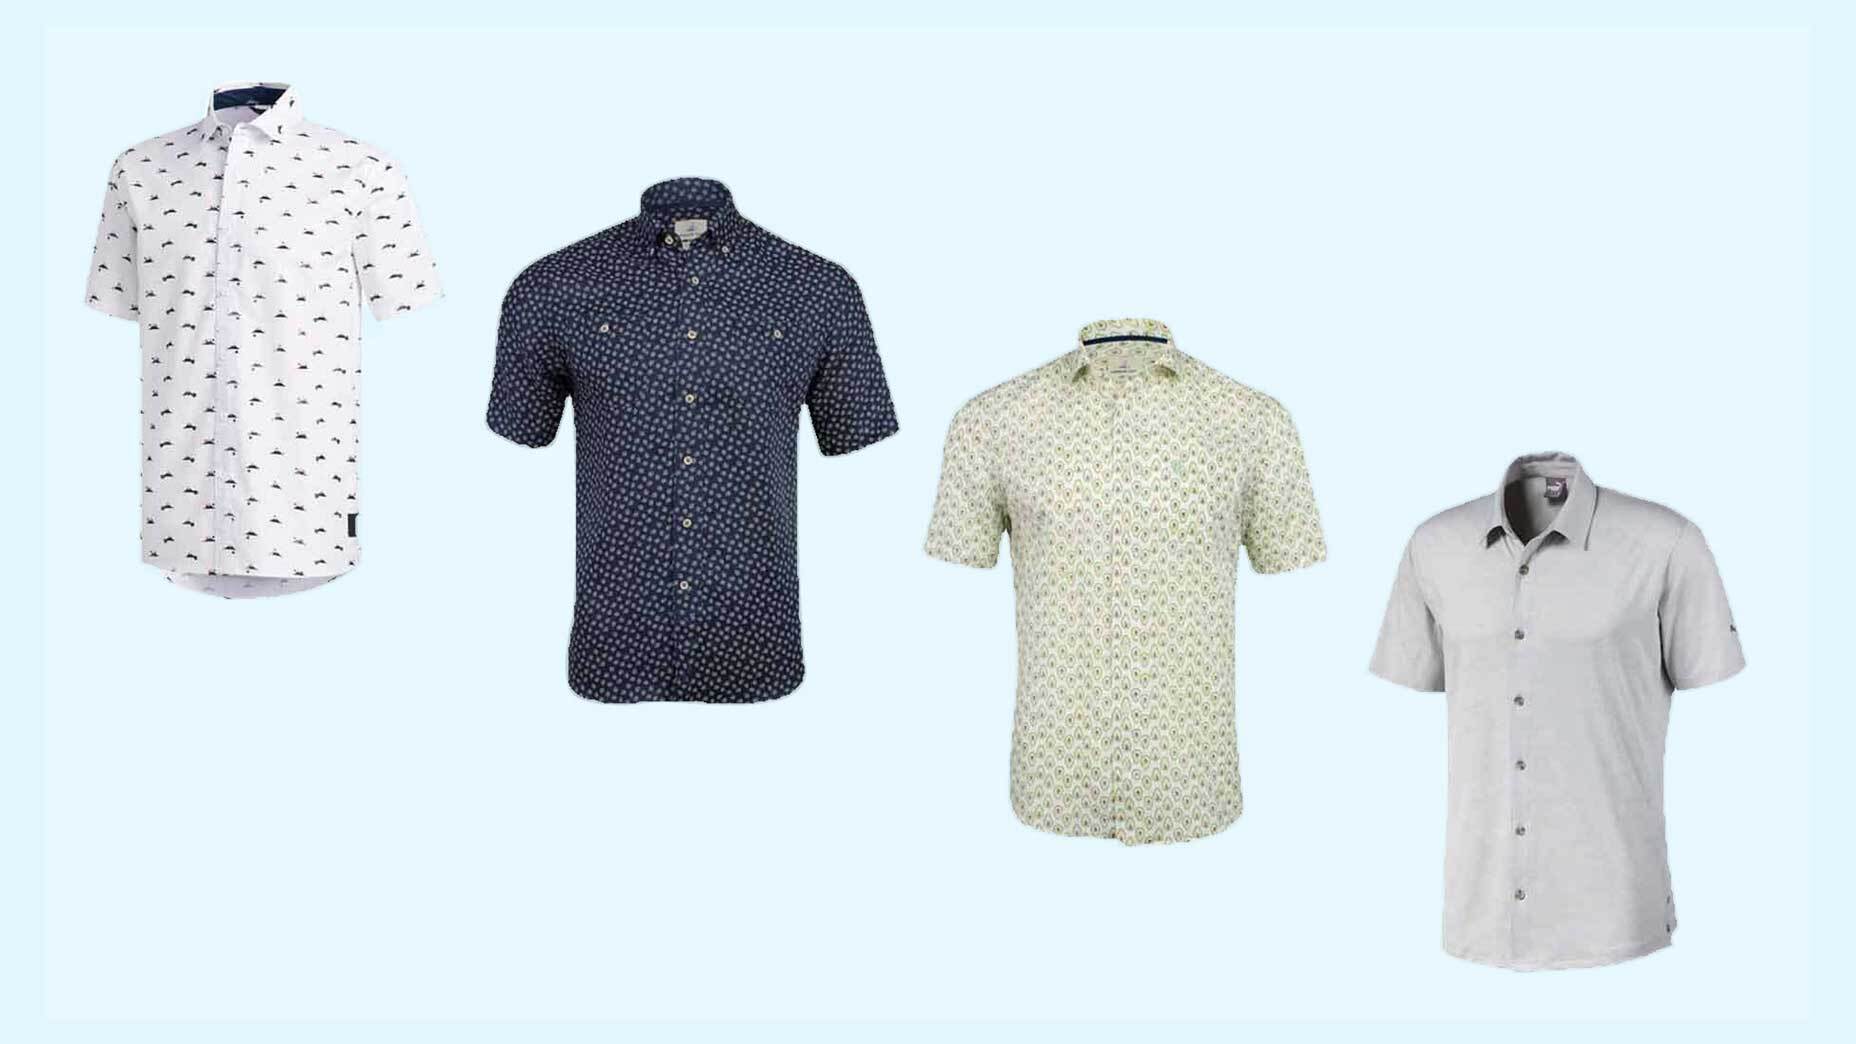 These 7 cool button-up golf shirts are a snazzy summertime option